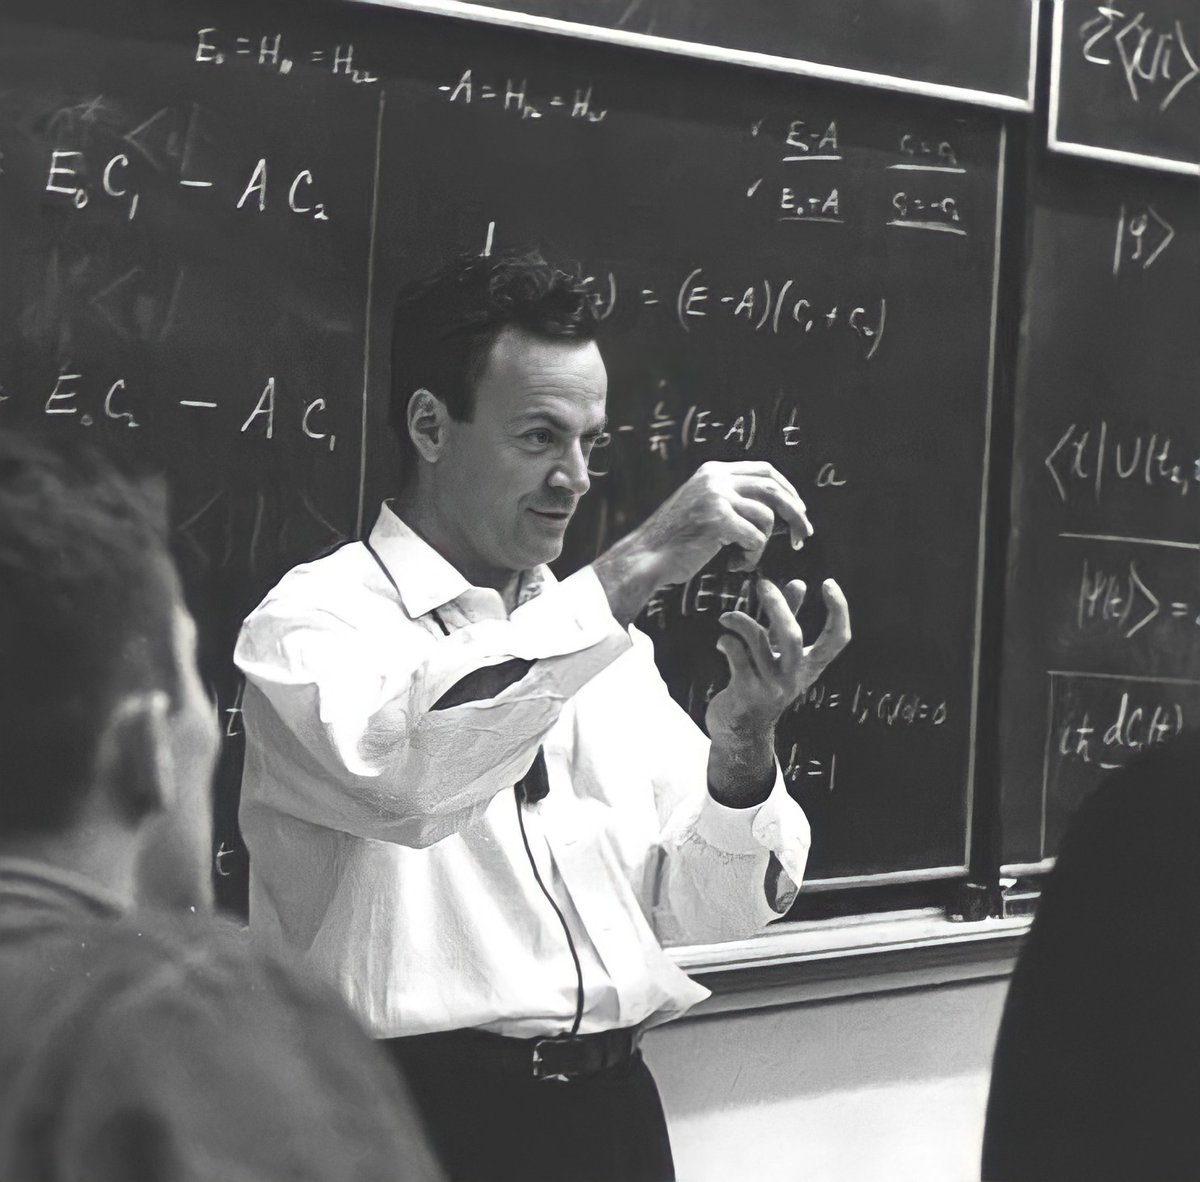 'Be teachable!
You're not always right.
Humility is necessary for growth.'
-- Prof. Richard Feynman 

Today is National Teachers Day.
Every day should be.

#NationalTeachersDay
#TeacherAppreciationDay
#TeacherAppreciationWeek2024